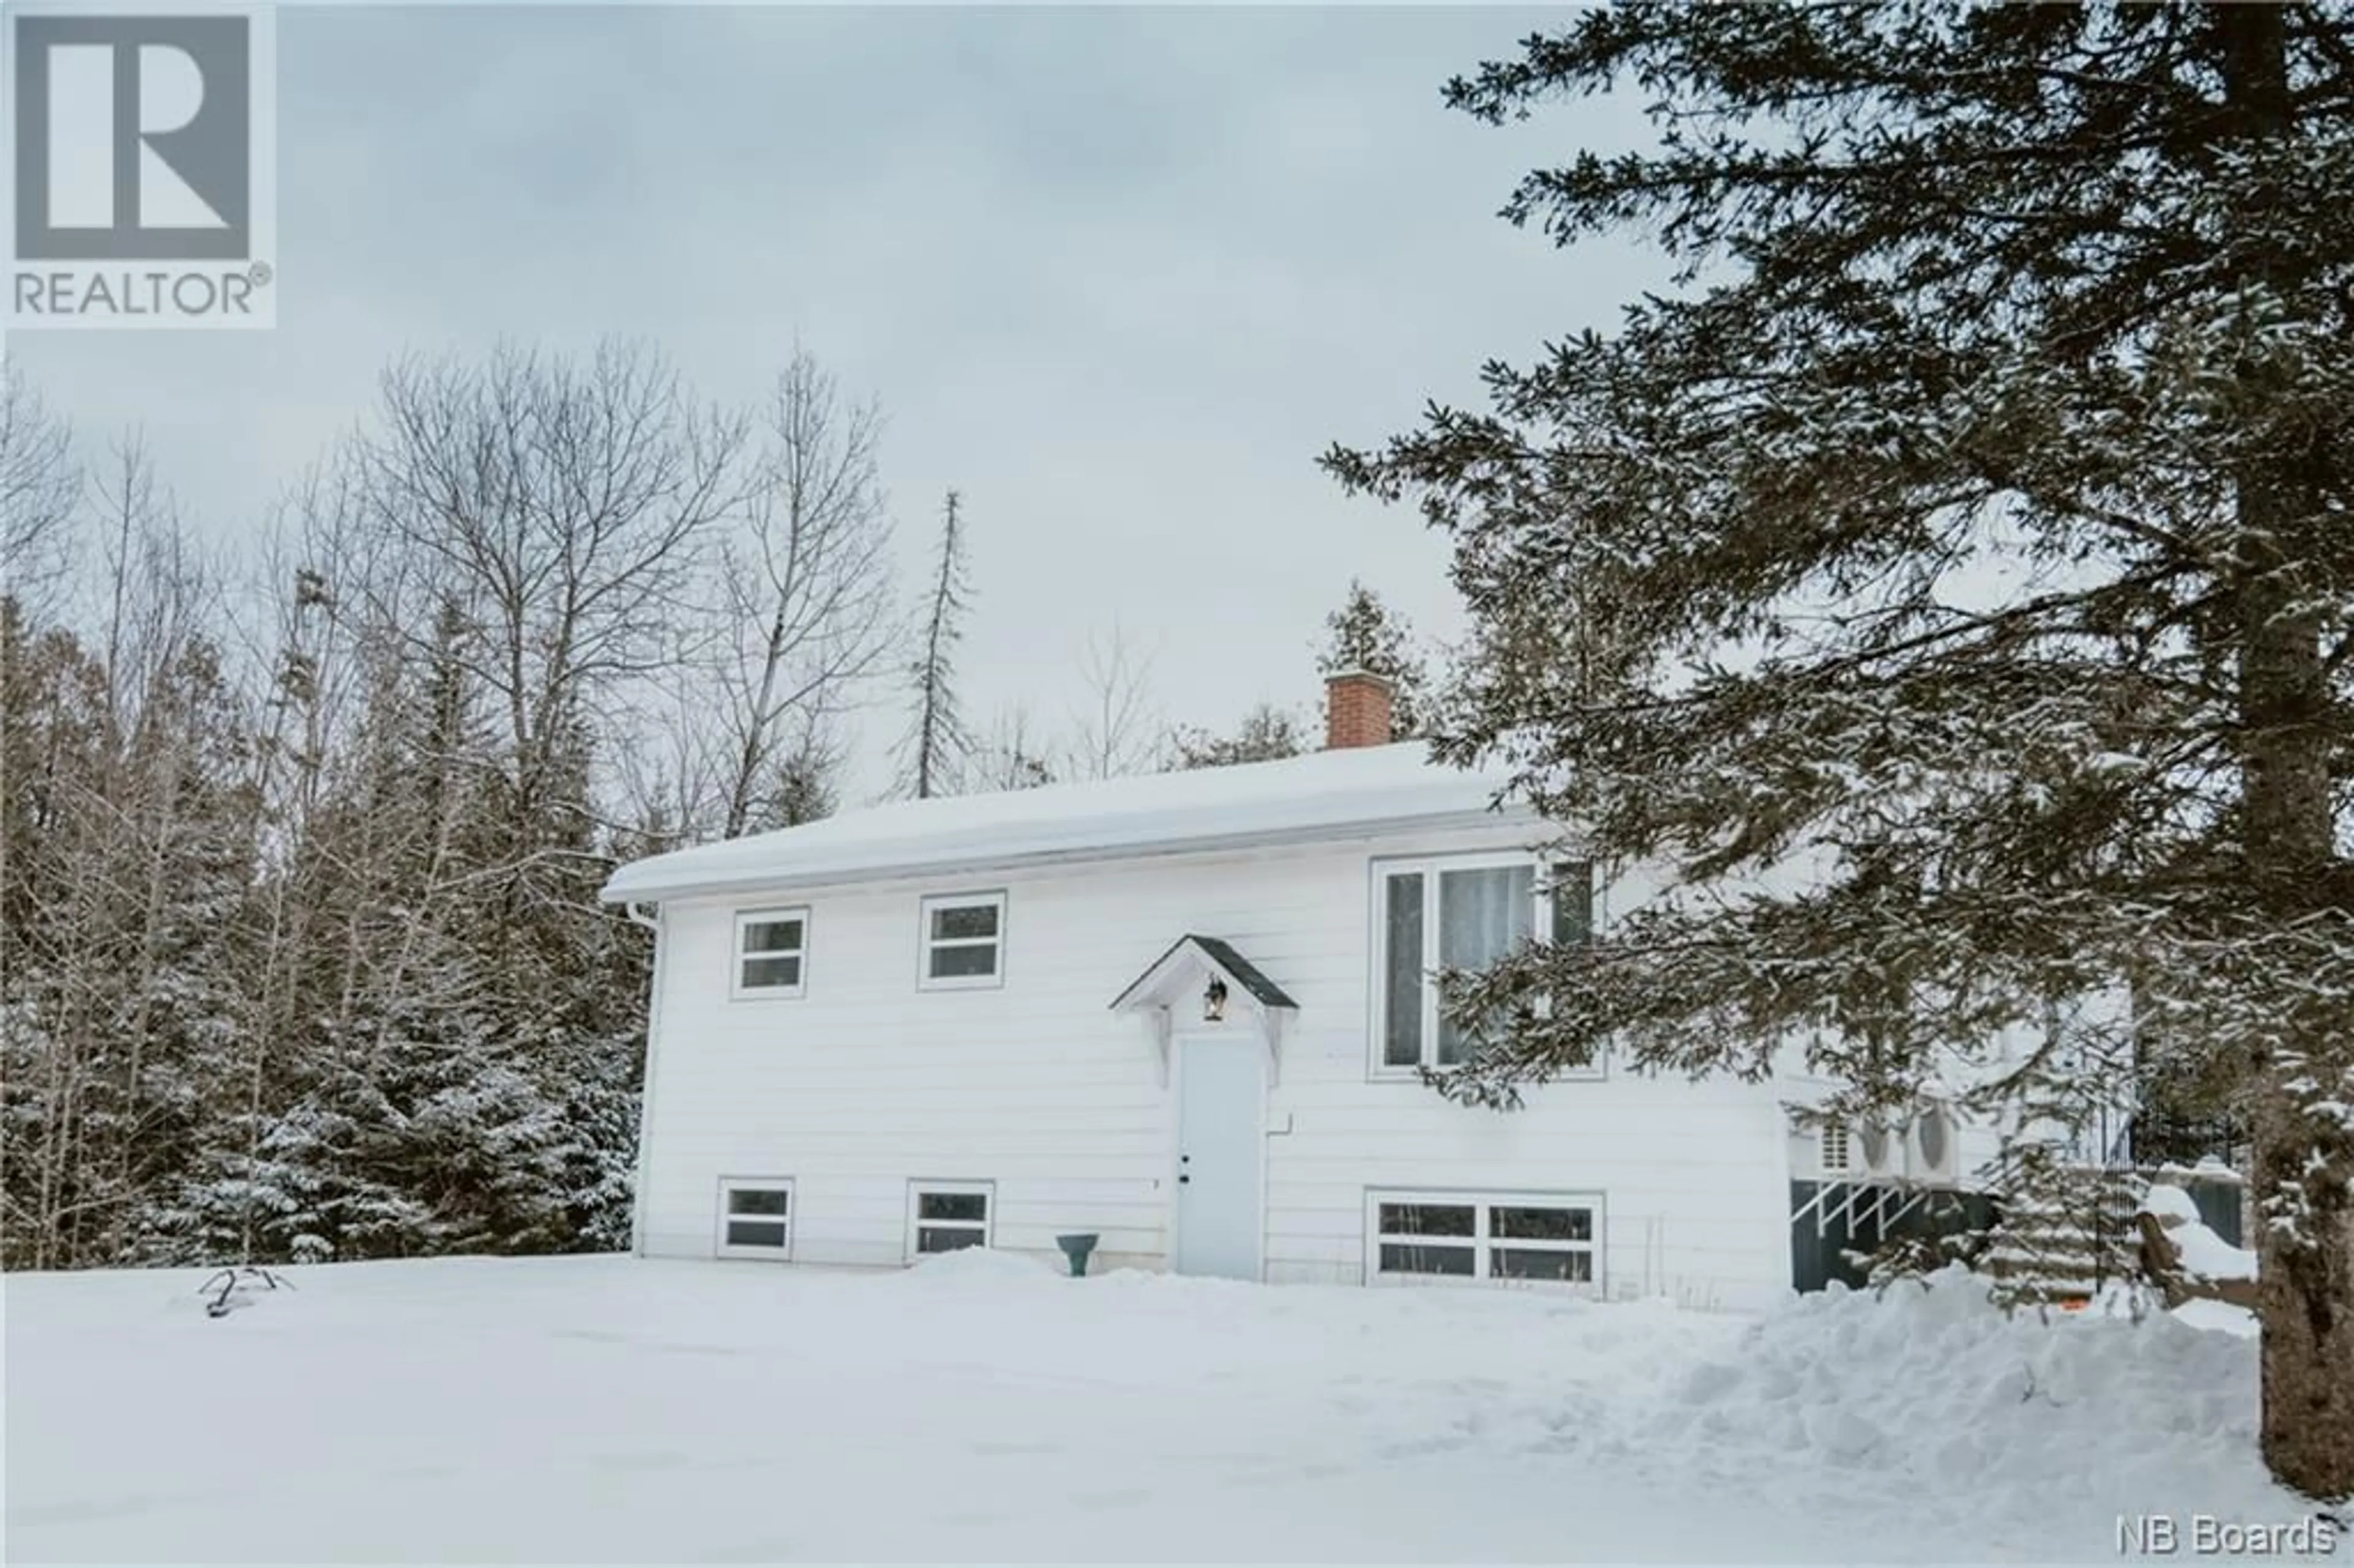 Home with unknown exterior material for 45 Good Corner Road, Good Corner New Brunswick E7K1R1